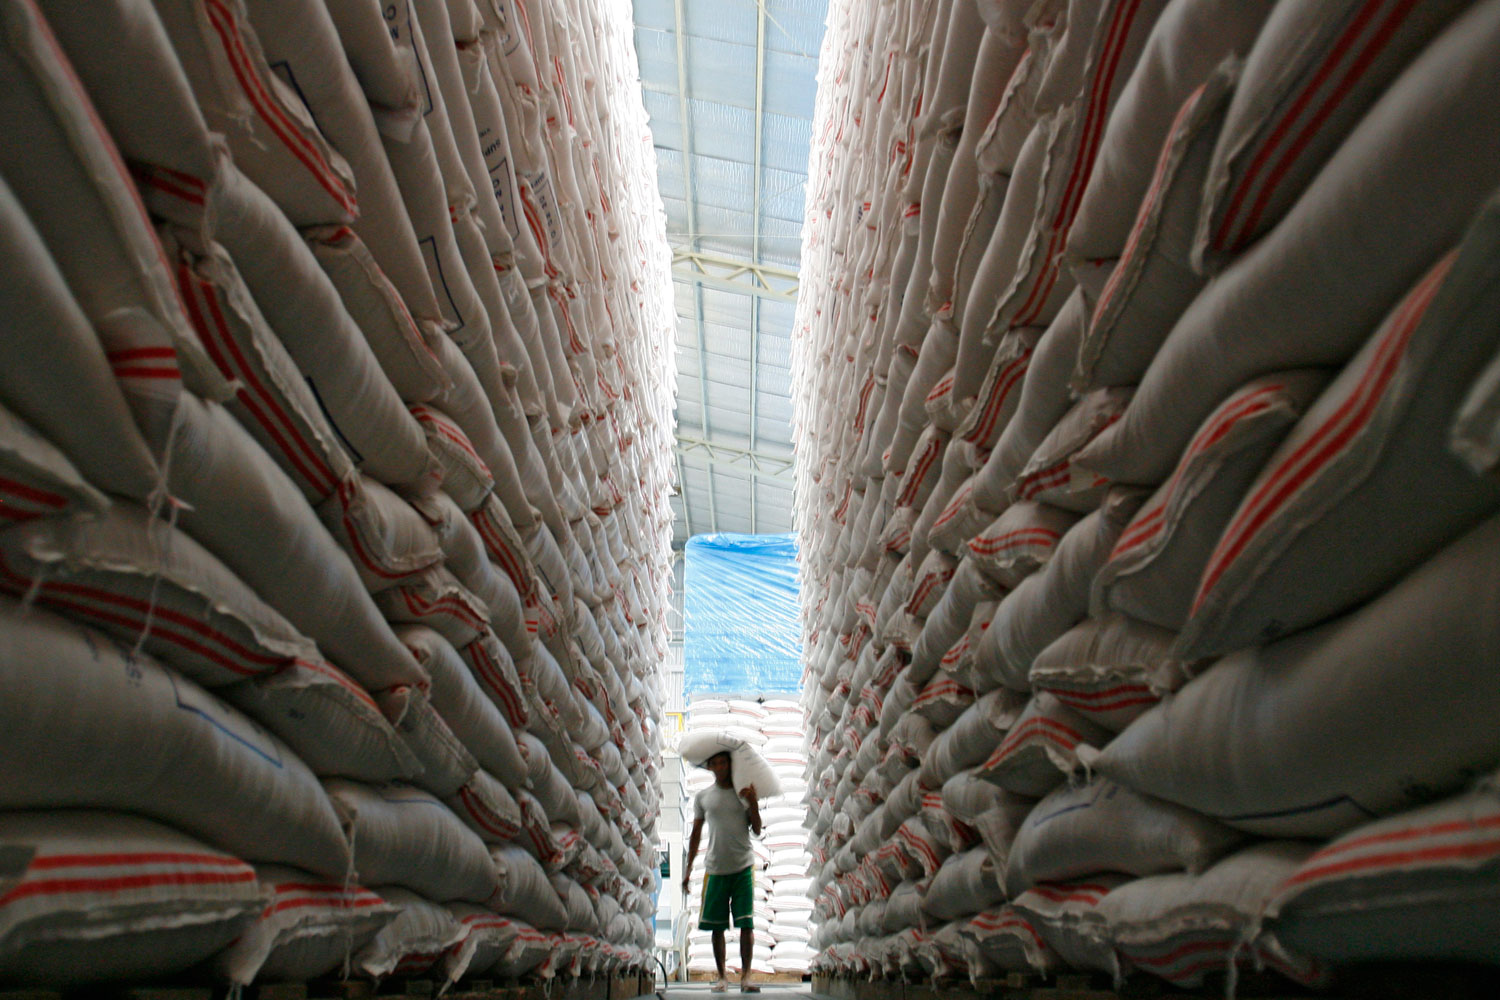 A worker carries a sack of rice inside the National Food Authority Warehouse in Quezon City, the Philippines on Aug. 16, 2010. Farm production in the country went down 2.59 percent in the first half due to the El Nino phenomenon,